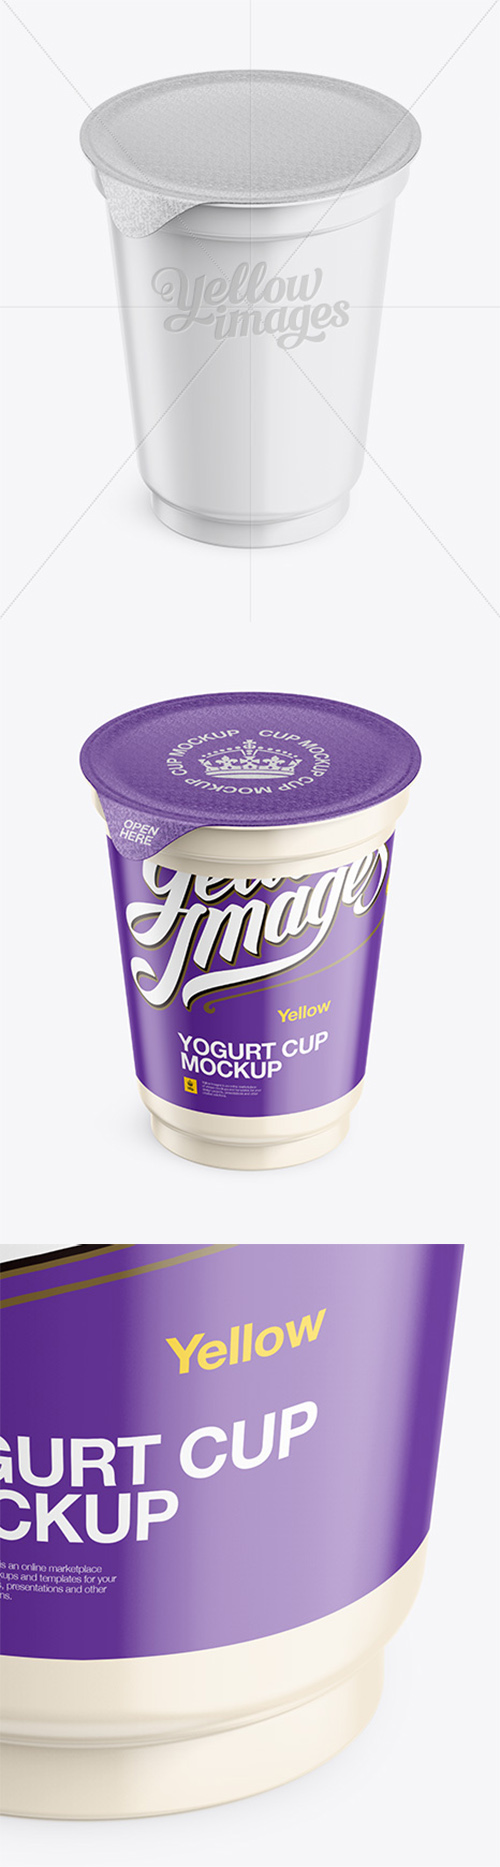 Plastic Cup with Foil Lid Mockup - Half Side View (High Angle Shot) 16413